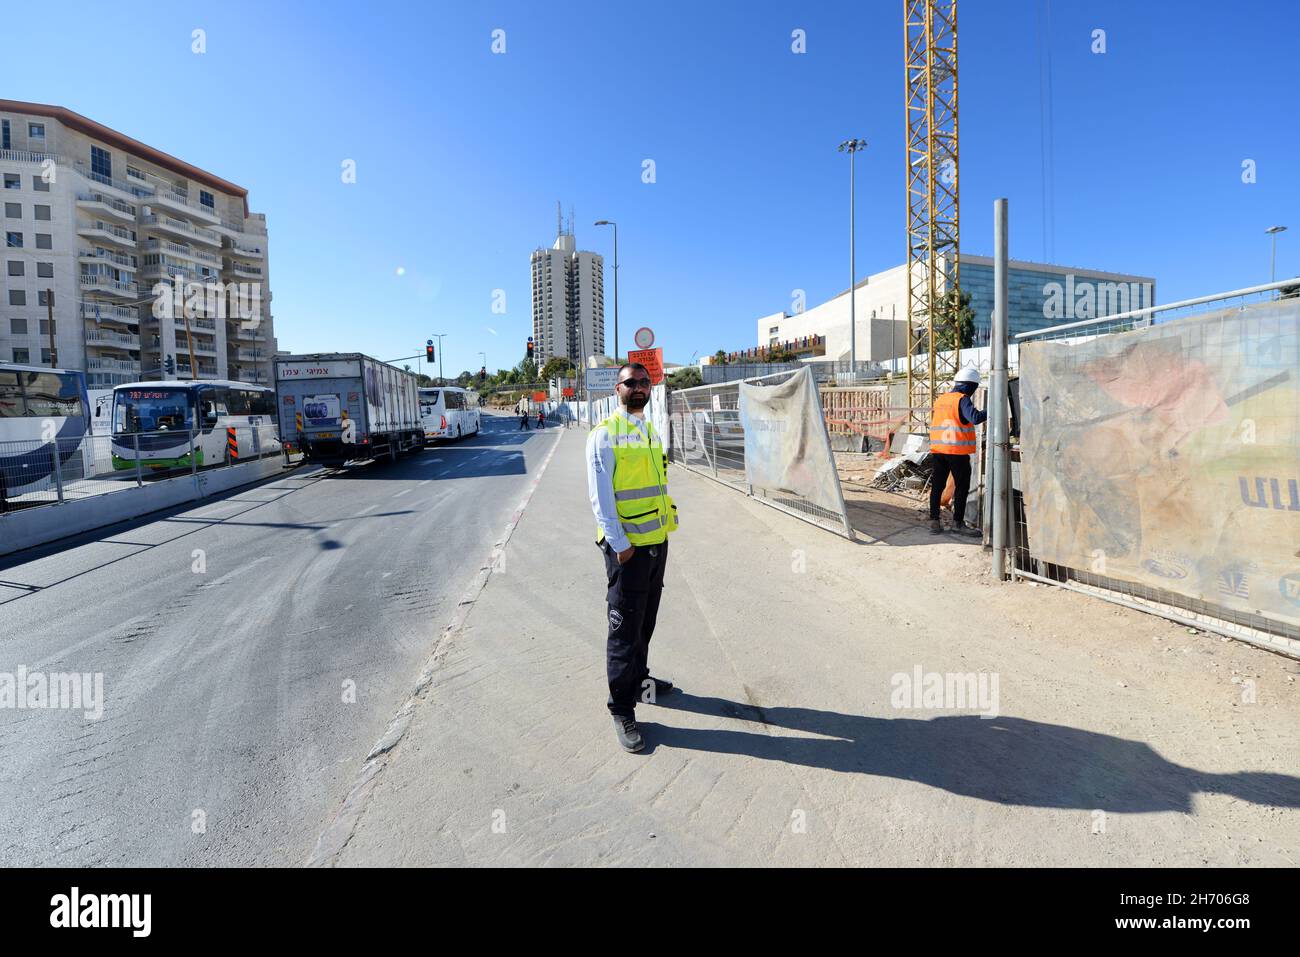 Construction of the city entrance project in Jerusalem, Israel Stock Photo